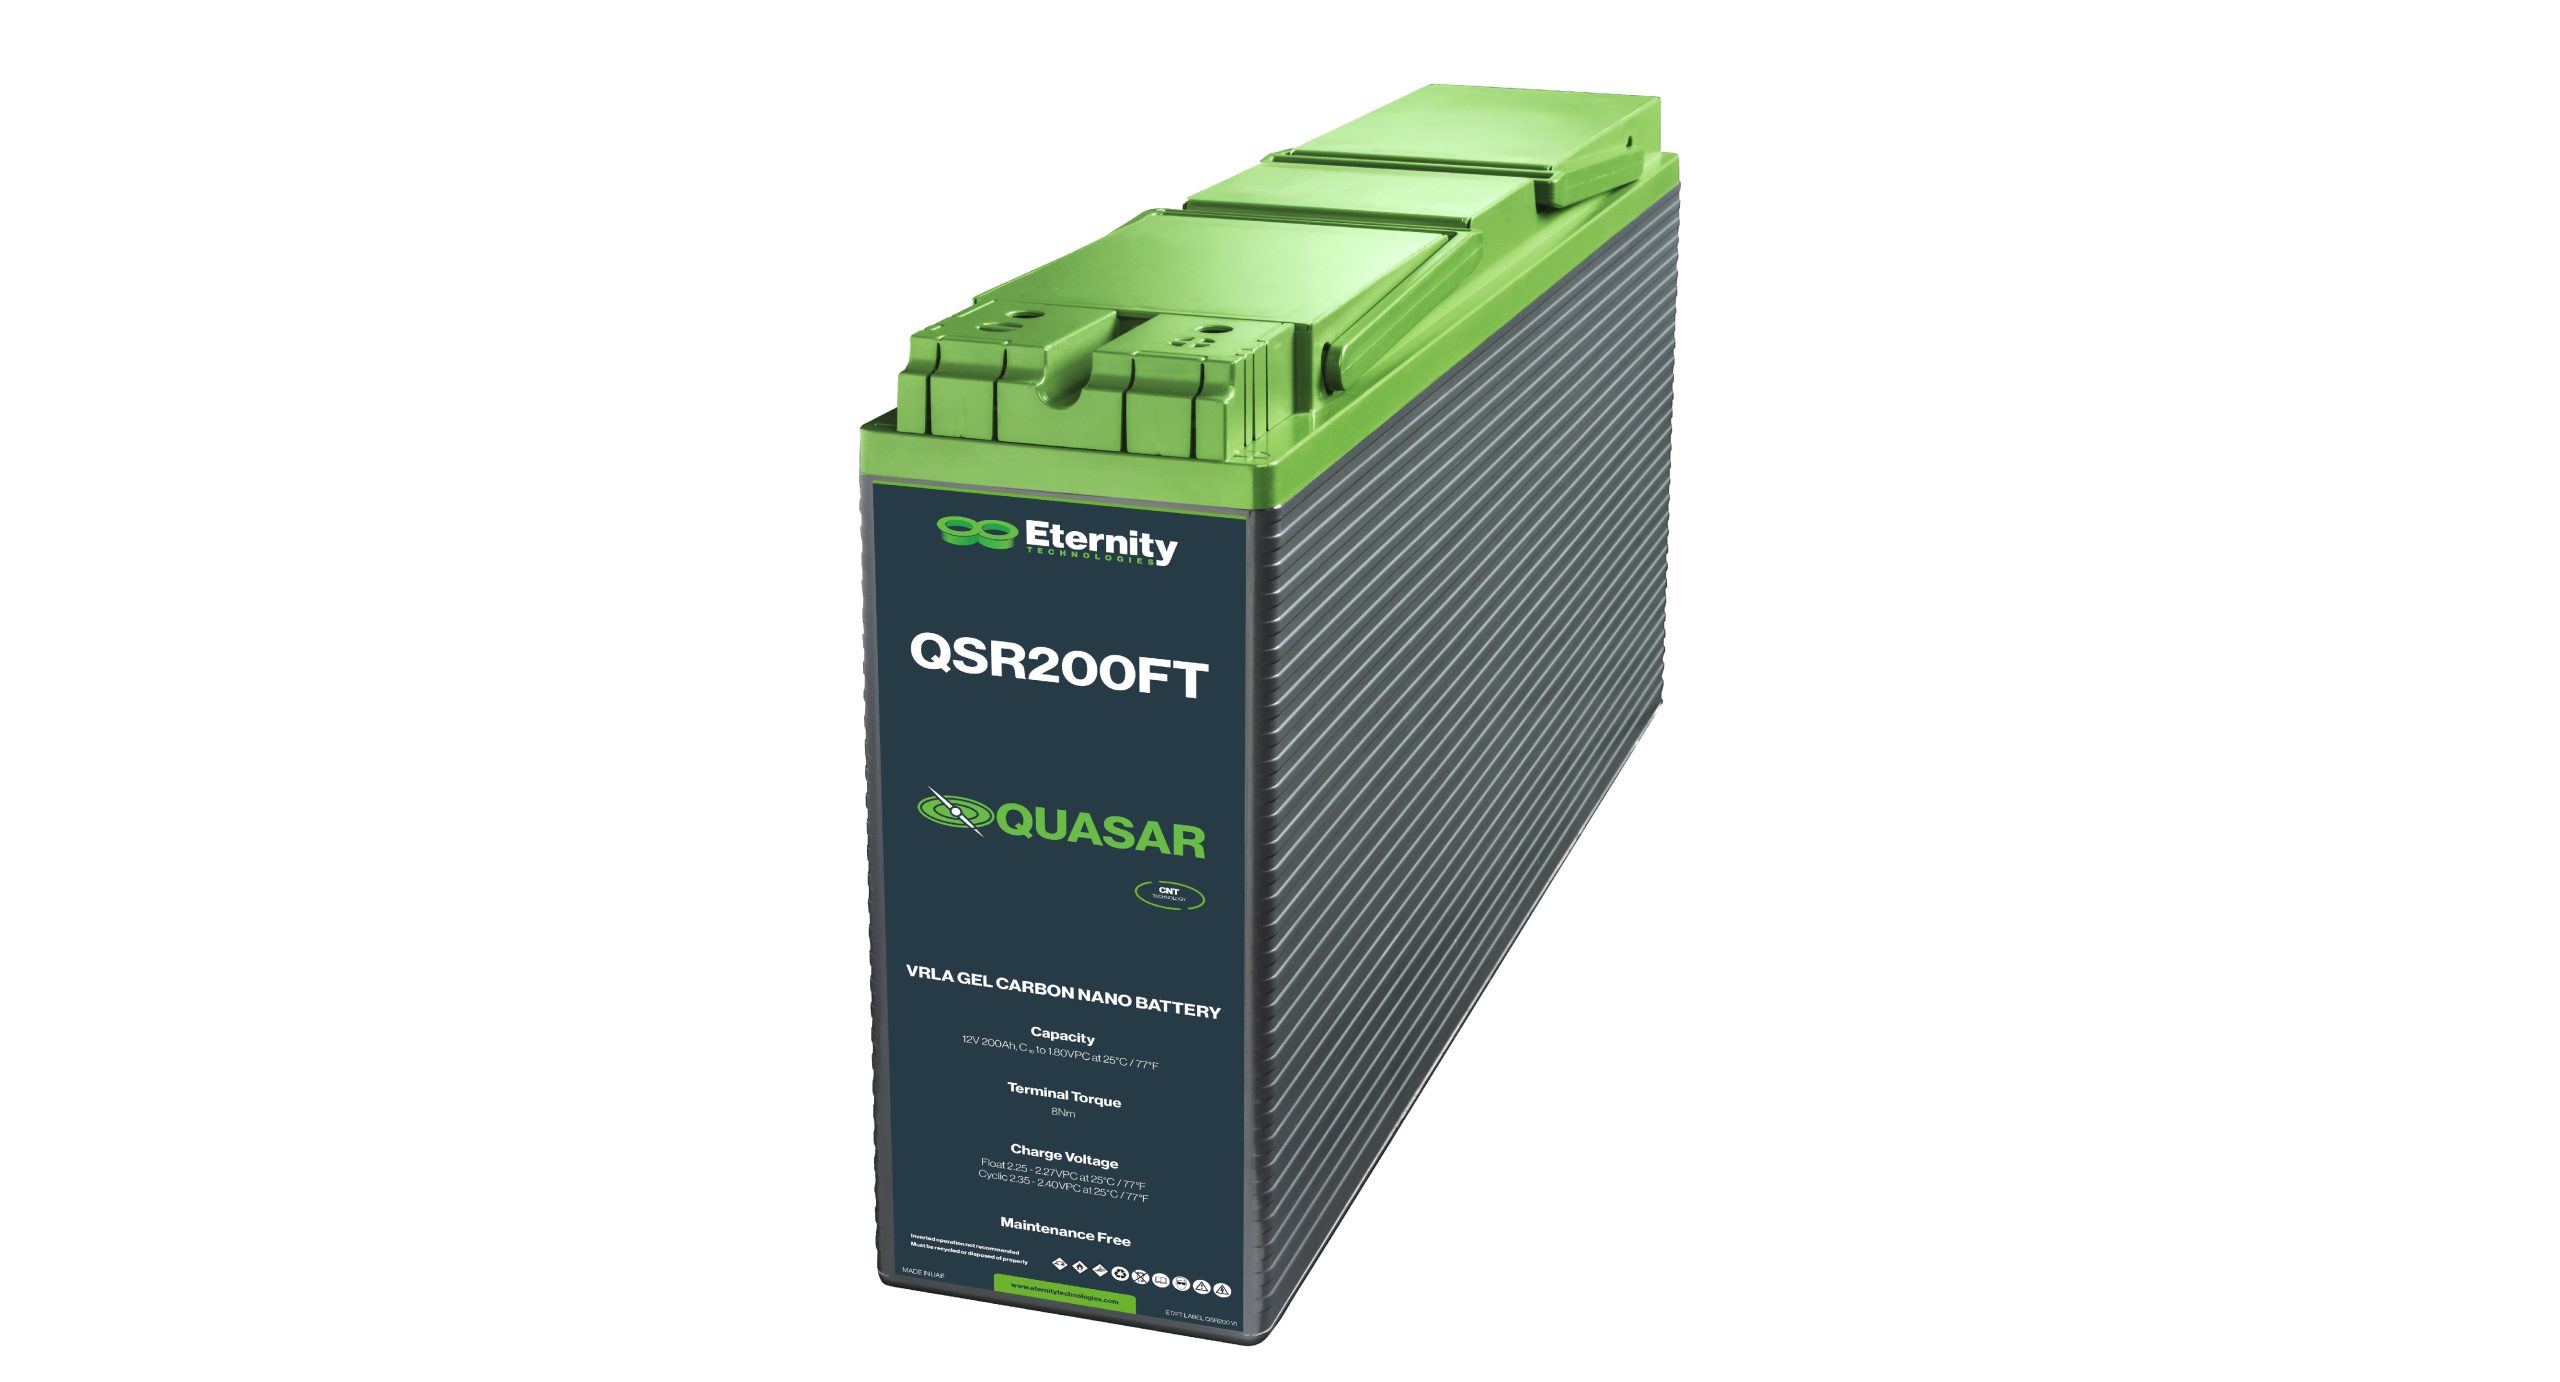 Eternity Technologies Introduces QUASAR Gel Carbon Nano FT Batteries to significantly develop the Global Stationary Market